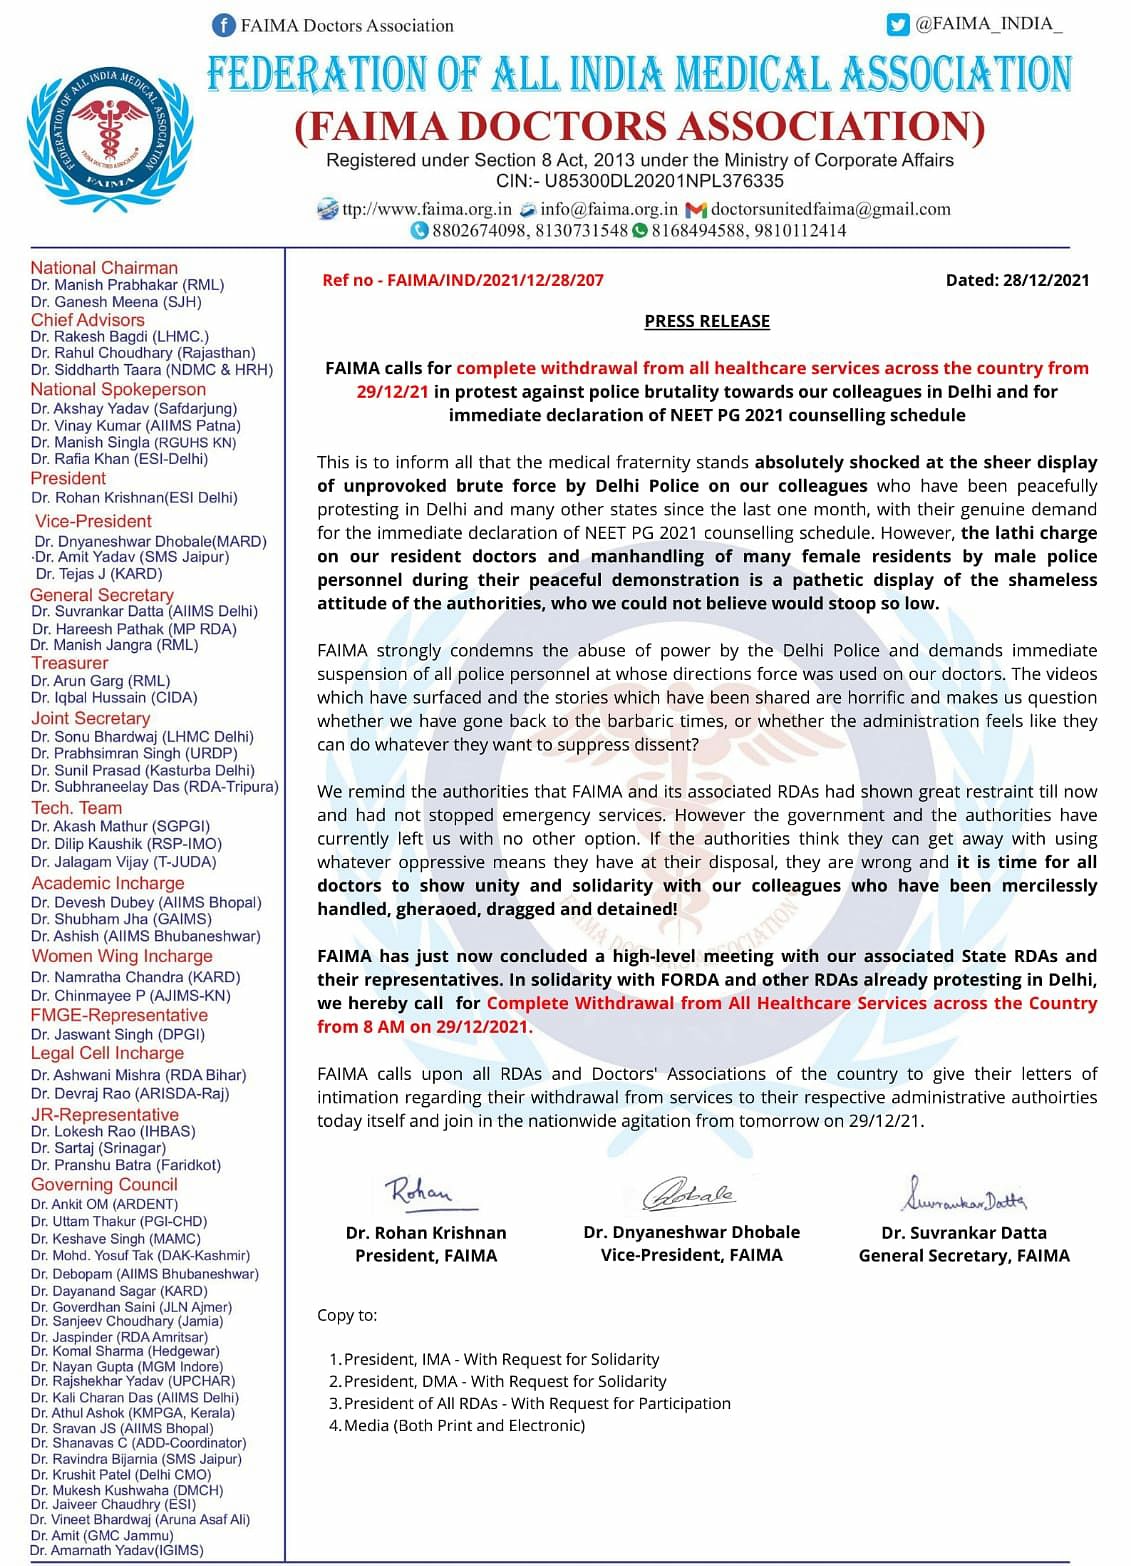 Federation of All India Medical Association (FAIMA) called for a complete suspension of services across the country.